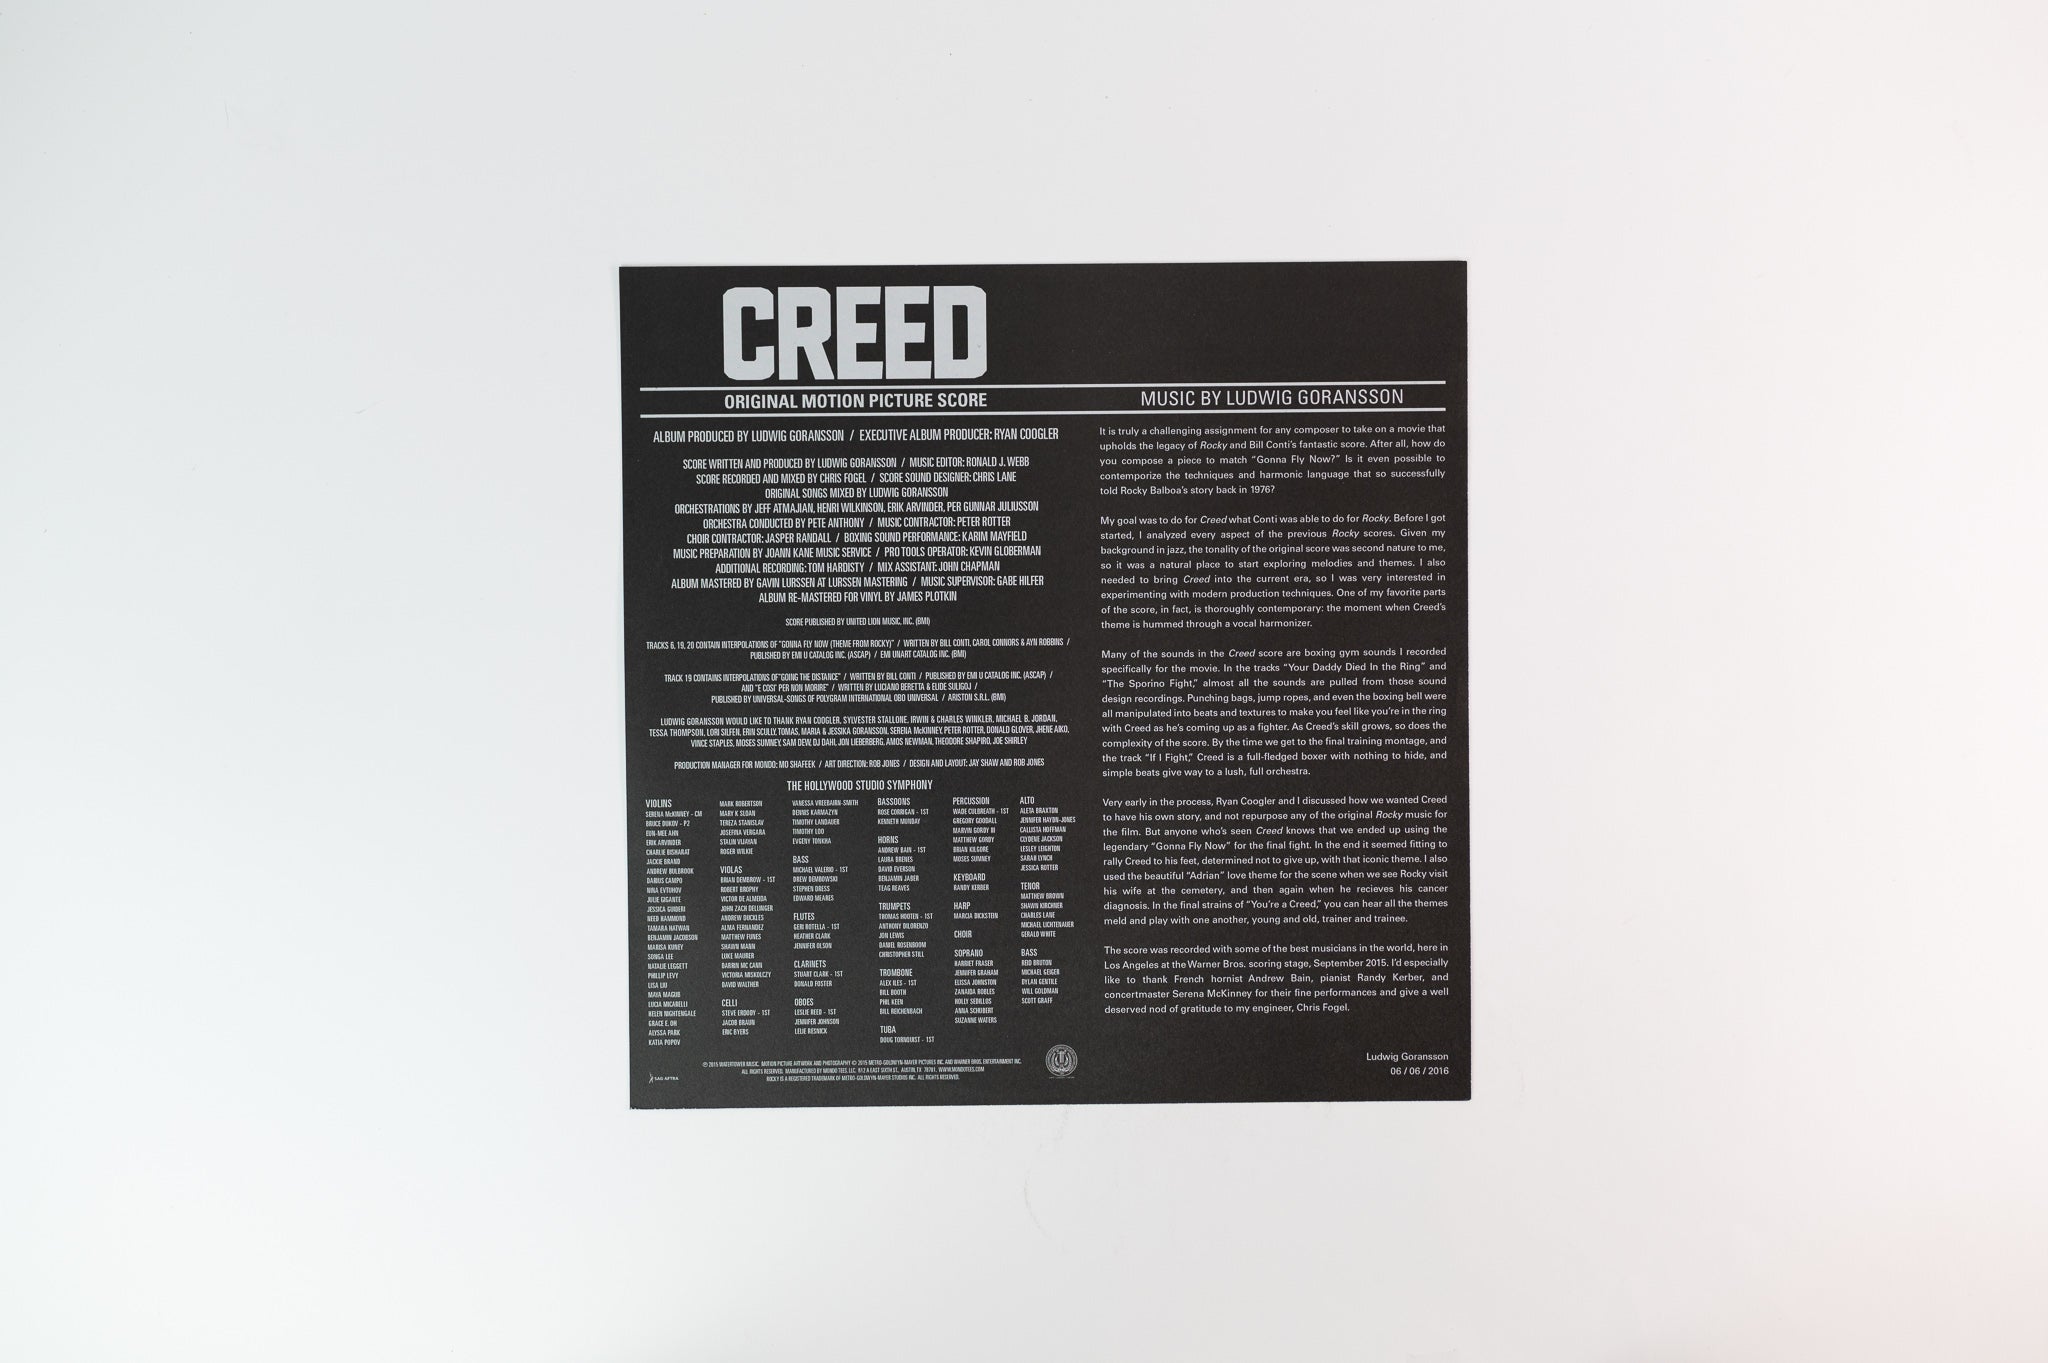 Ludwig Goransson - Creed (Original Motion Picture Score, Composer's Cut) on Mondo Limited Red White & Blue Tricolor